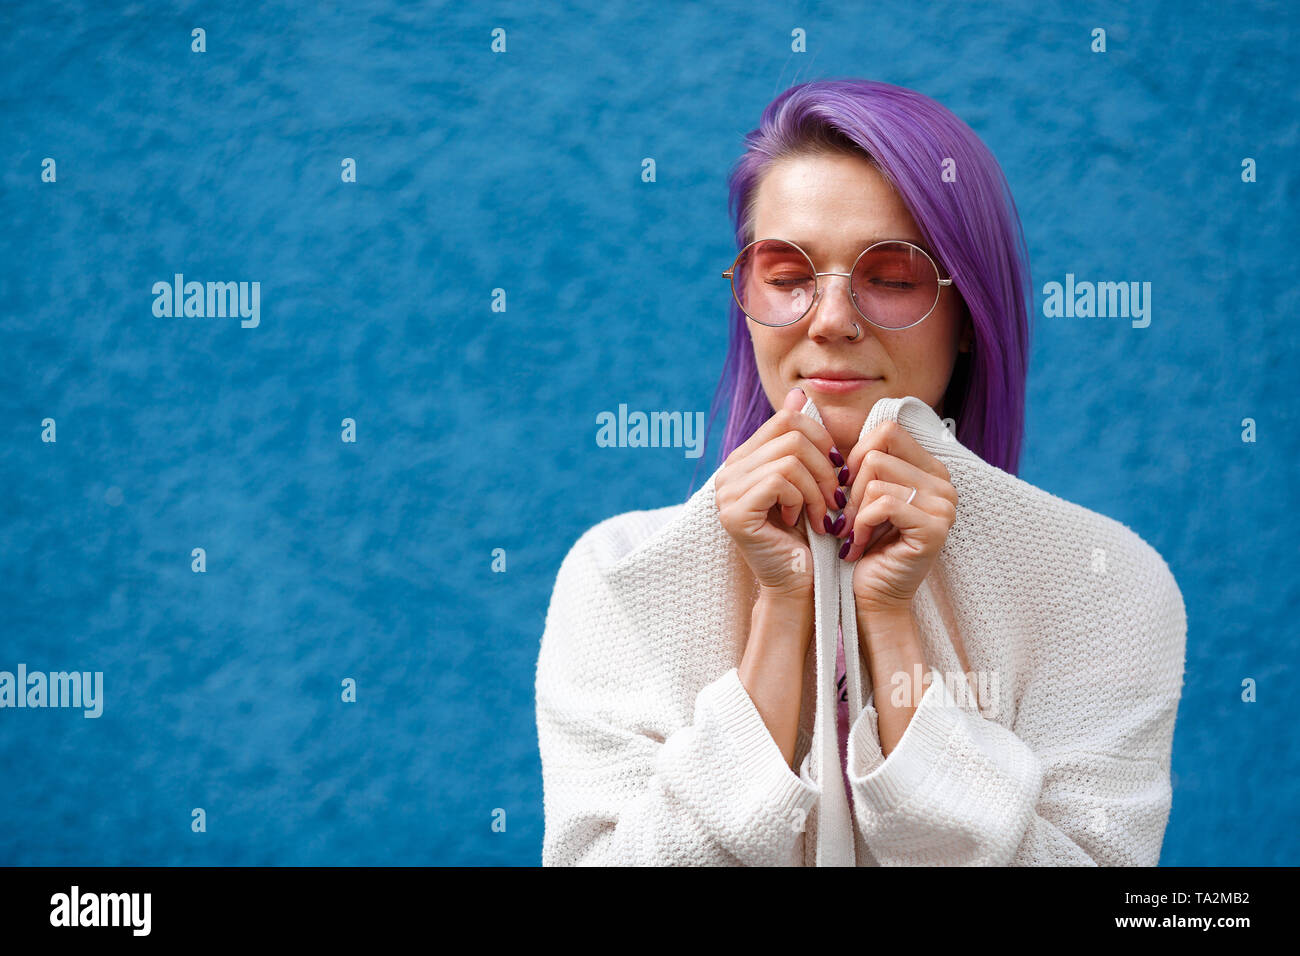 a girl with violet hair on a blue background closed eyes, wearing pink glasses, wrapped in a jacket, smiling, calm, beautiful hands, bit cold Stock Photo